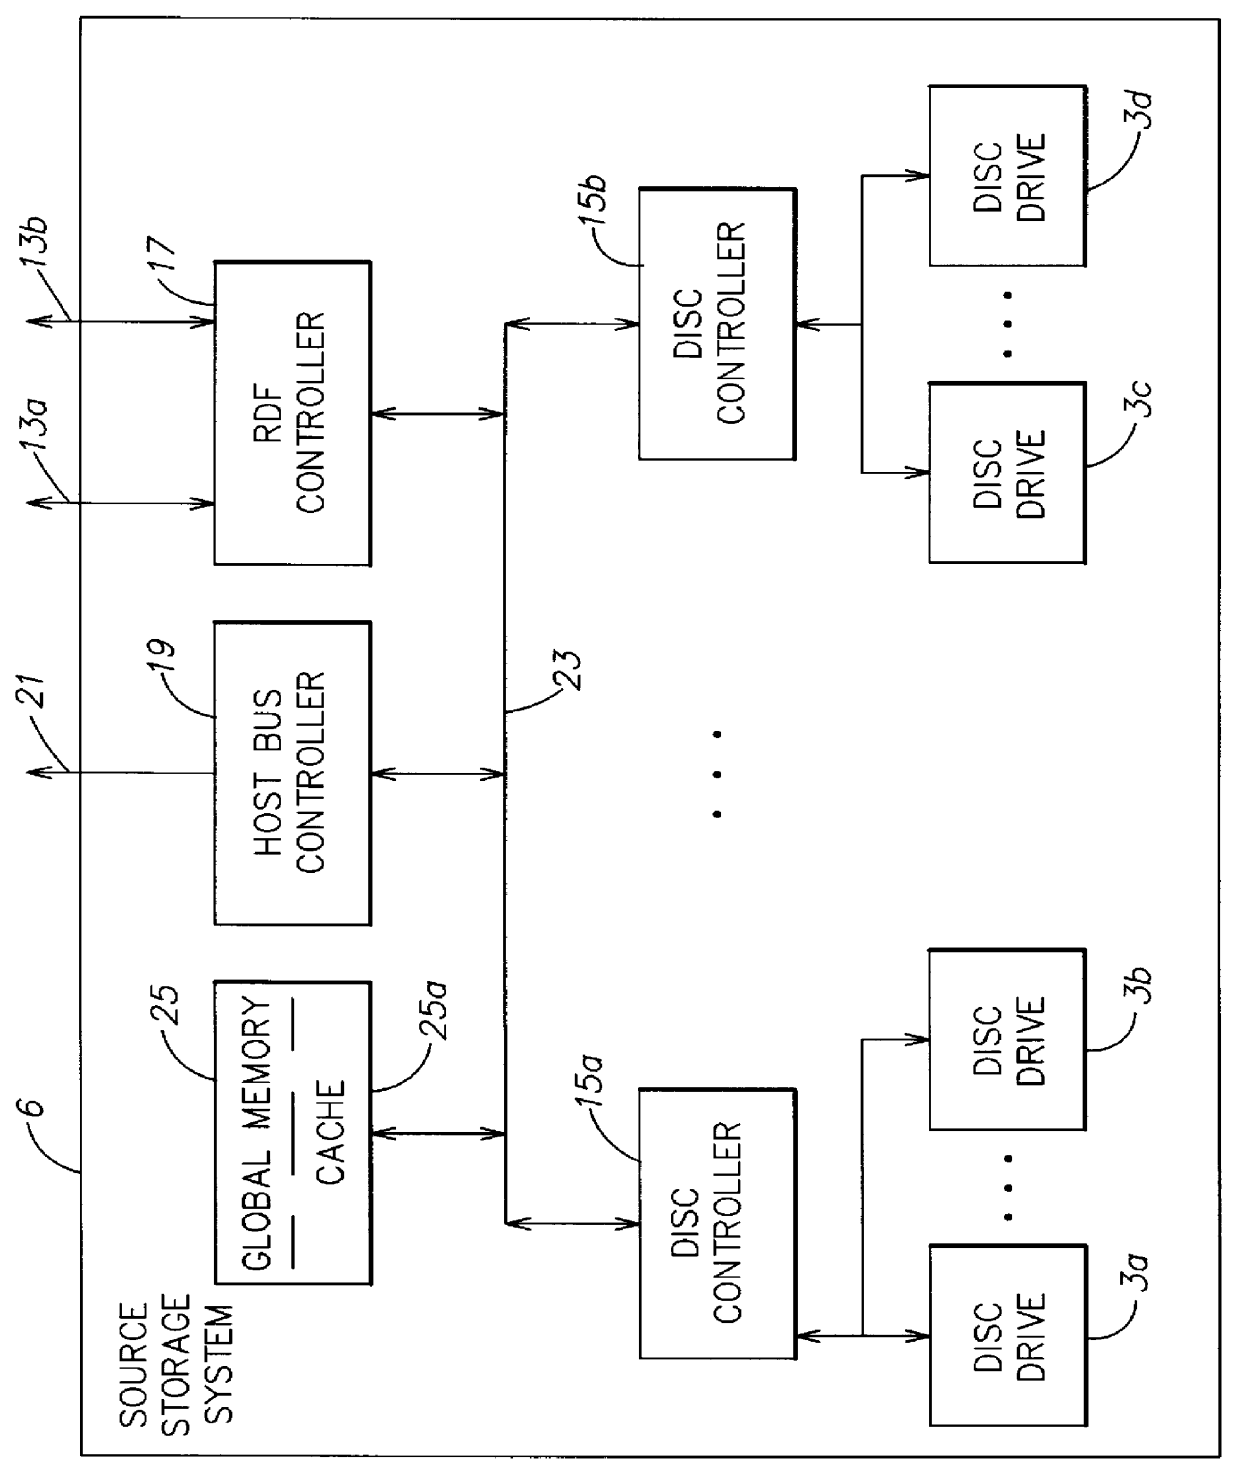 Method and apparatus for asynchronously updating a mirror of a source device